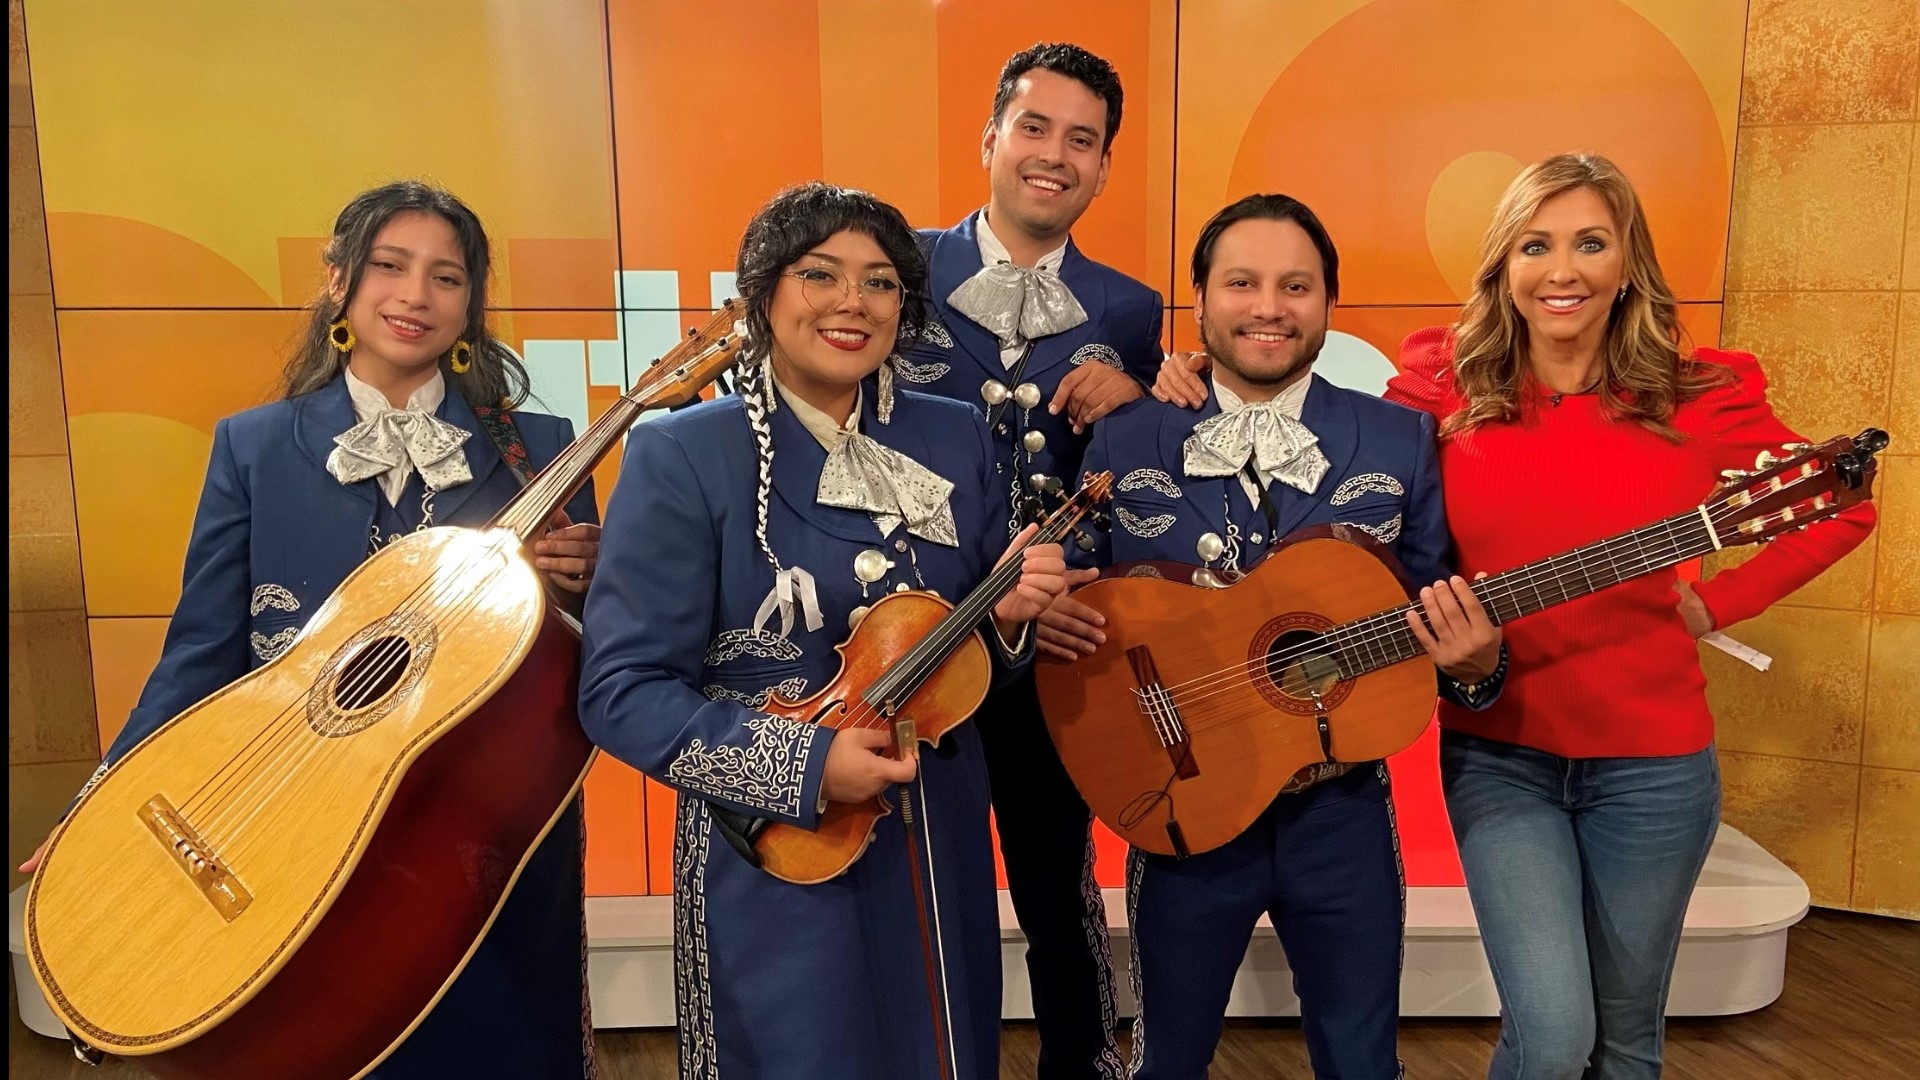 They're a group of classically trained musicians uplifting Mexican tradition through Mariachi. Watch Búhos de Oro perform on A&C!